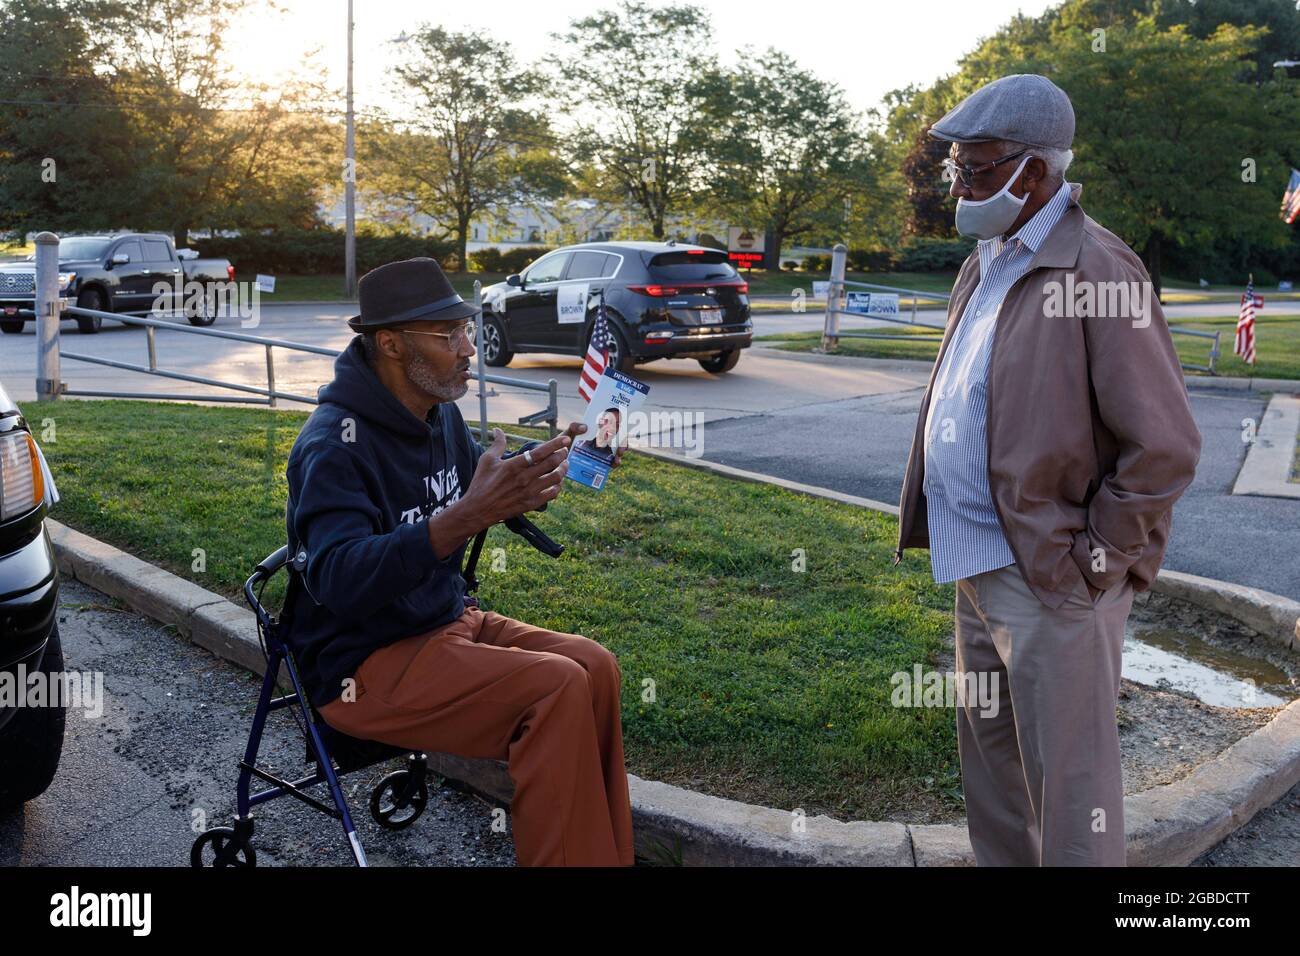 Erwin Johnson, 61, of Cleveland, Ohio talks to a voter outside of the polling place at Warrensville Heights Recreation Center. Johnson came to show support for Nina Turner because, “I think she's the best candidate. She's been a state rep, She's the most qualified.” Voters came out to the polls for a special election in Ohio's 11th district. The two main leading candidates for this House of Representatives seat are two Democrats, Nina Turner, a progressive candidate, and Shontel Brown, who represents the traditional Democratic establishment. (Photo by Stephen Zenner/SOPA Images/Sipa USA) Stock Photo